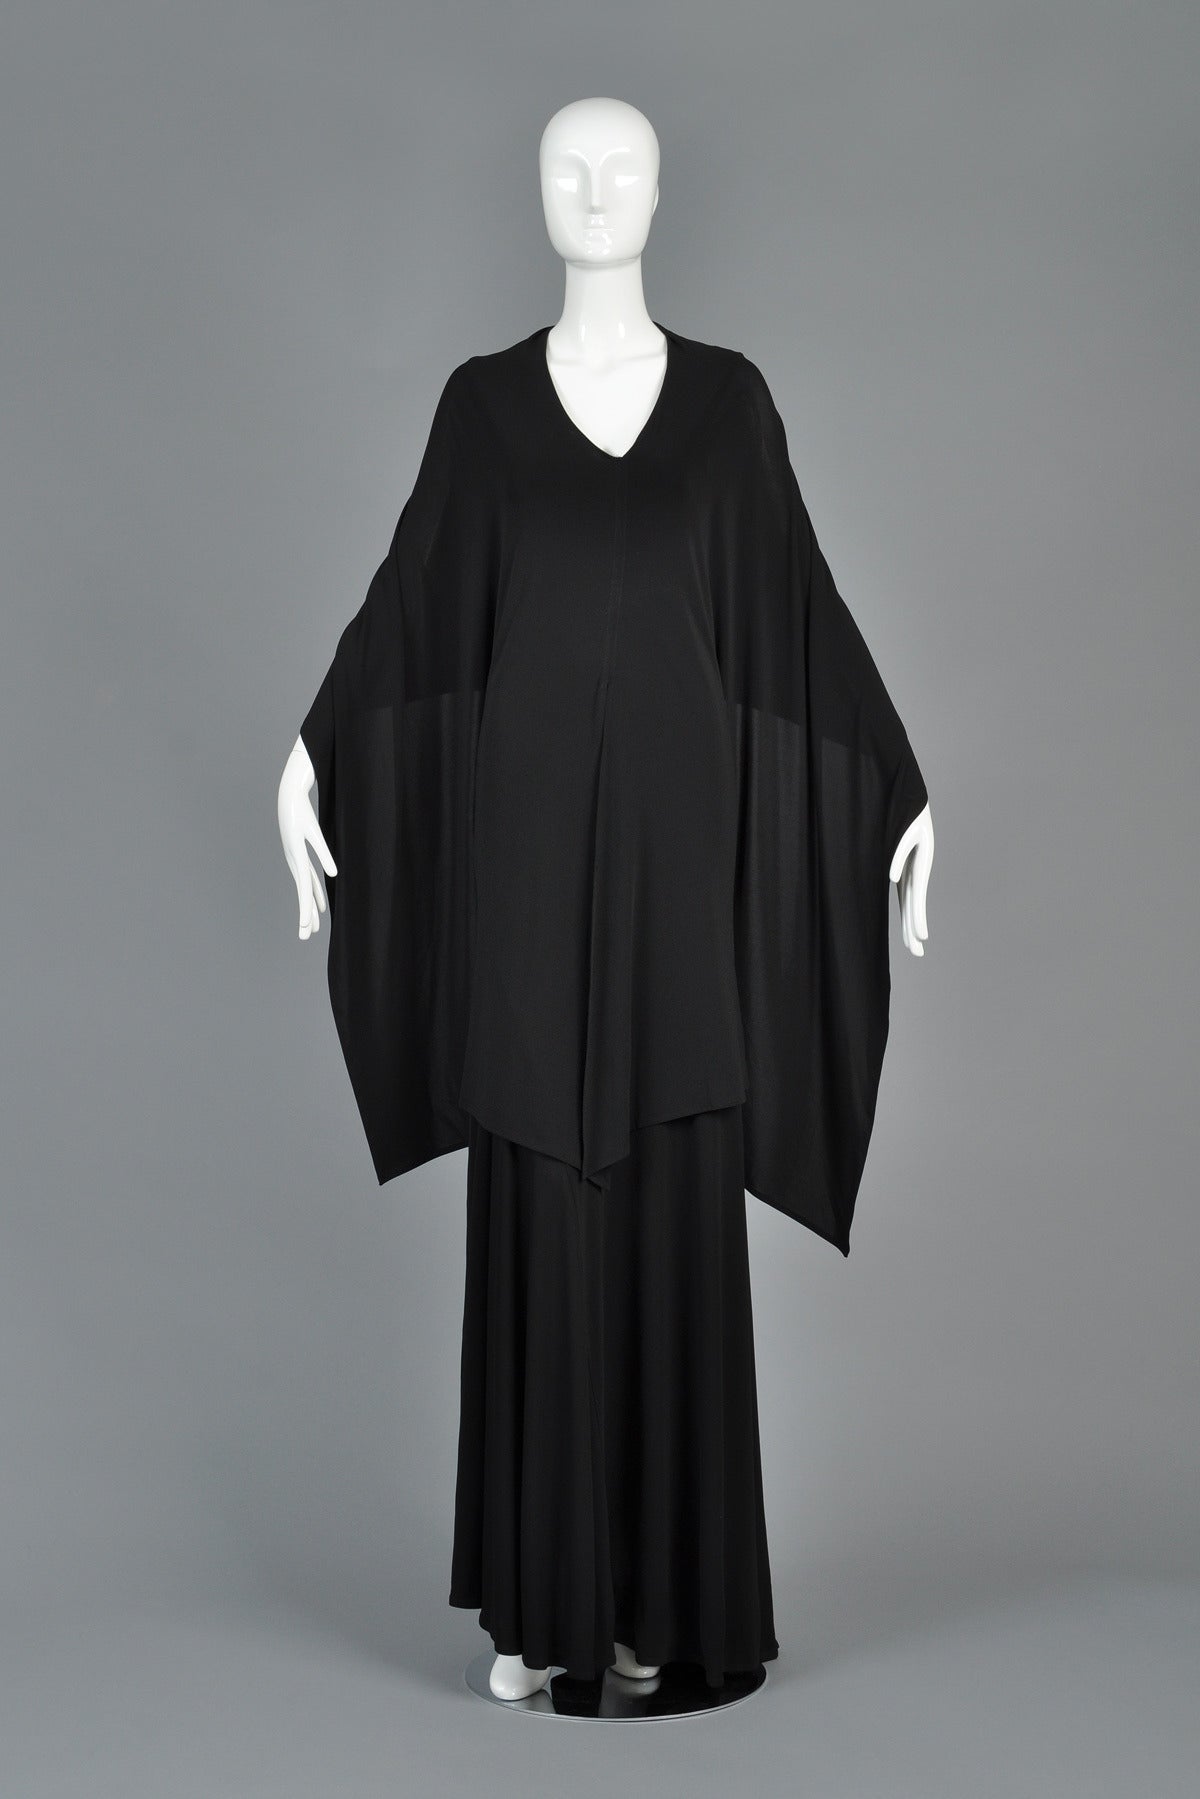 Lovely recent black caped dress by Eun Hwa. Dress is made from slinky black jersey with a plunging neckline and flared skirt. The attached cape/shawl can be worn multiple ways - thrown over the shoulders, as a scarf or even as a hood. Has two hidden